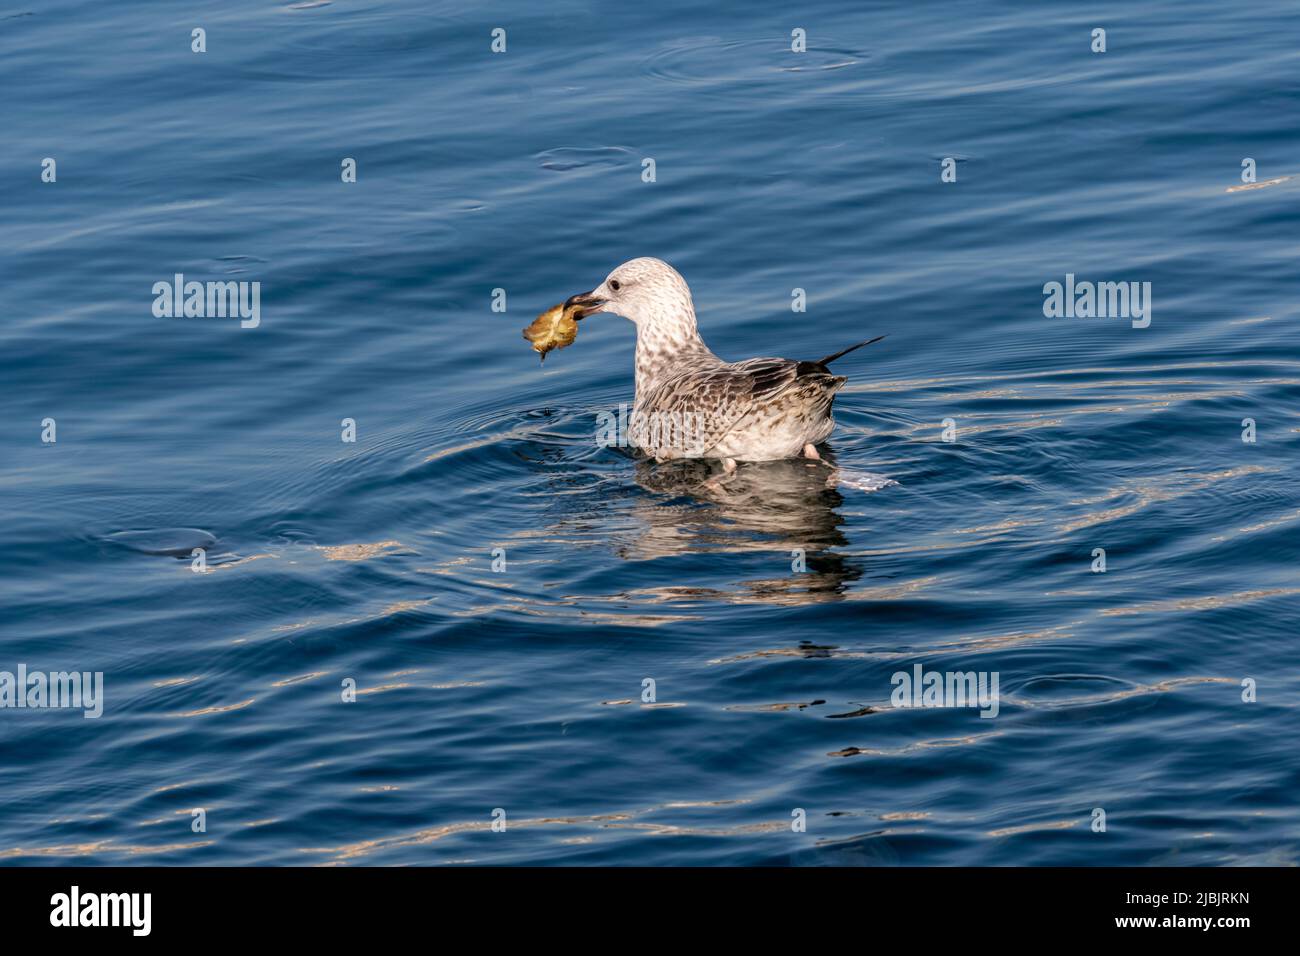 Shot of seagull swimming with bait in mouth taken with selective focus. Stock Photo